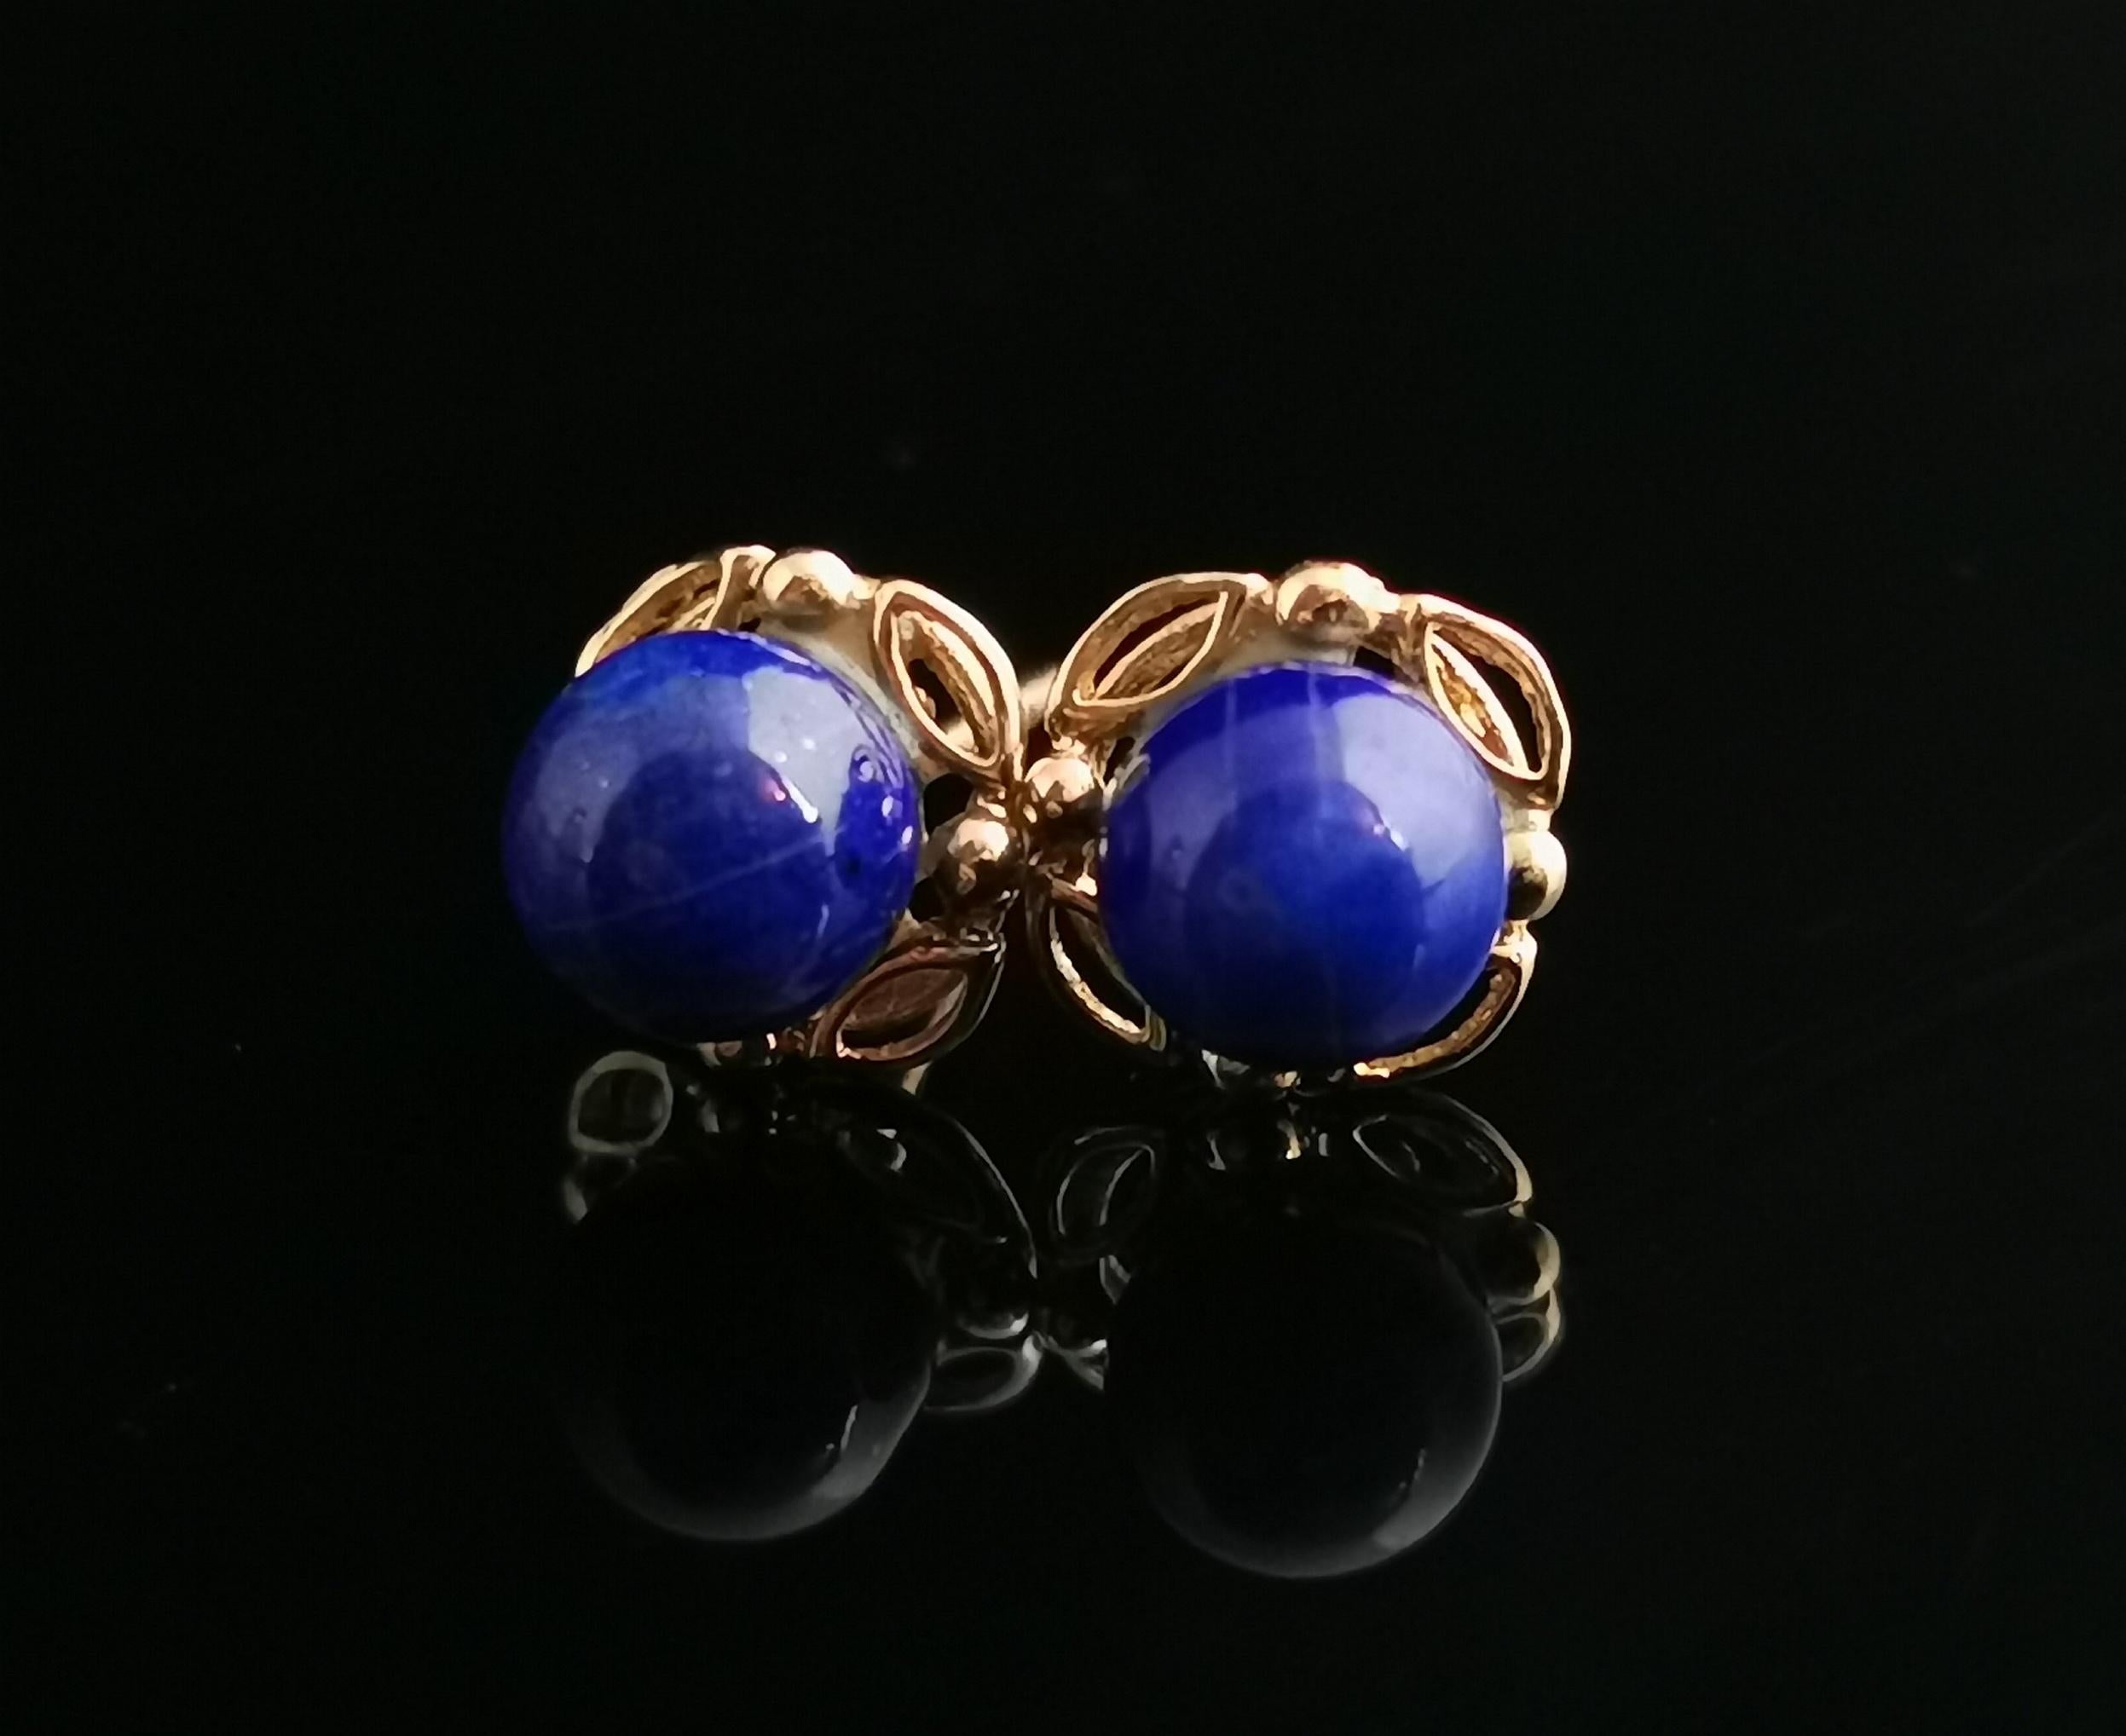 A very pretty pair of vintage Lapis Lazuli and 9kt yellow gold stud earrings.

Sweet button bead lapis lazuli cabochons set onto a fancy 9kt yellow gold scrolling mount with 9kt gold Post backs.

They come with a replacement pair of vintage gold